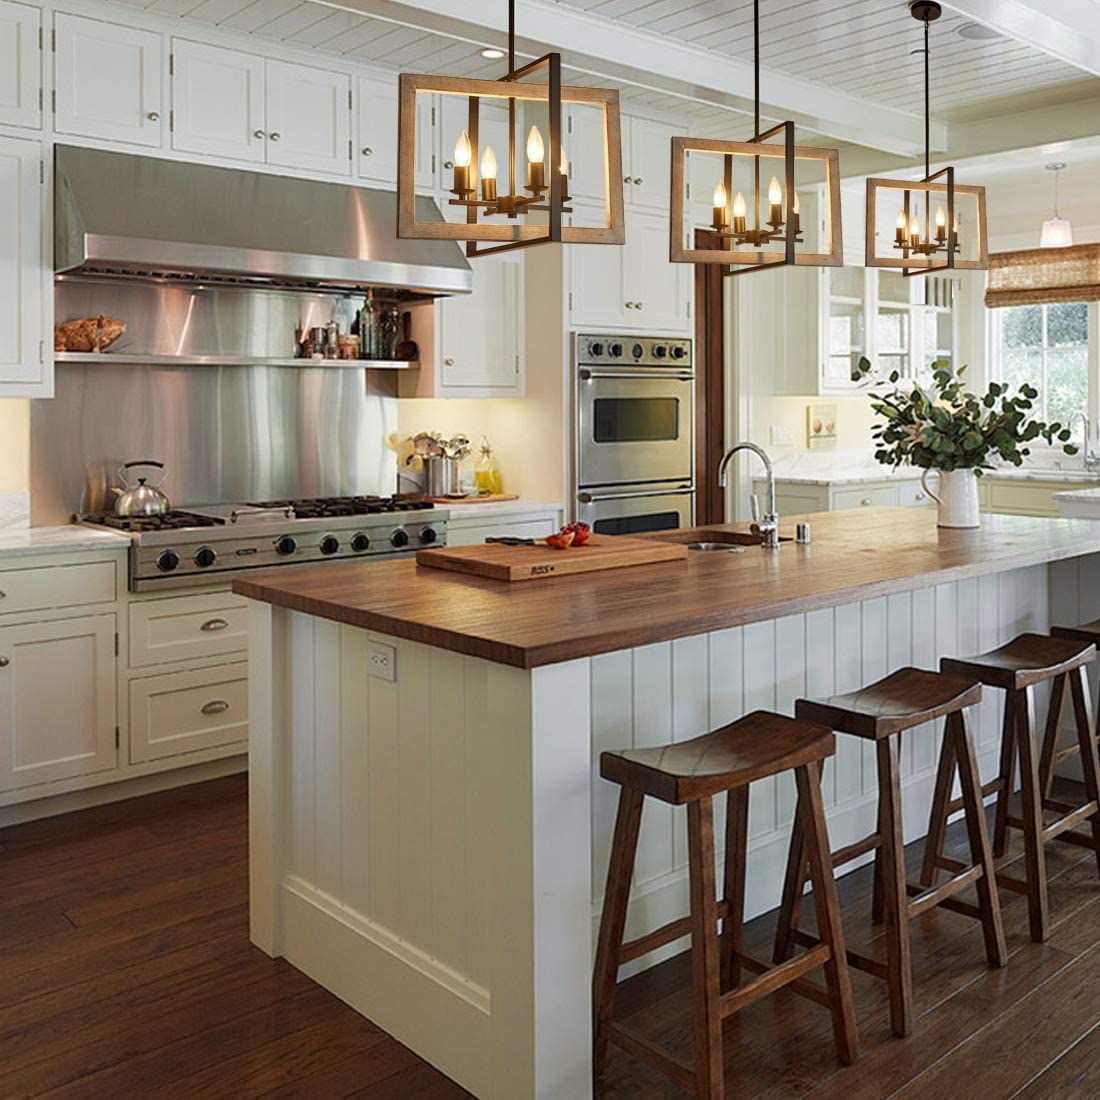 Styling Your Home Using Farmhouse Lighting Fixtures